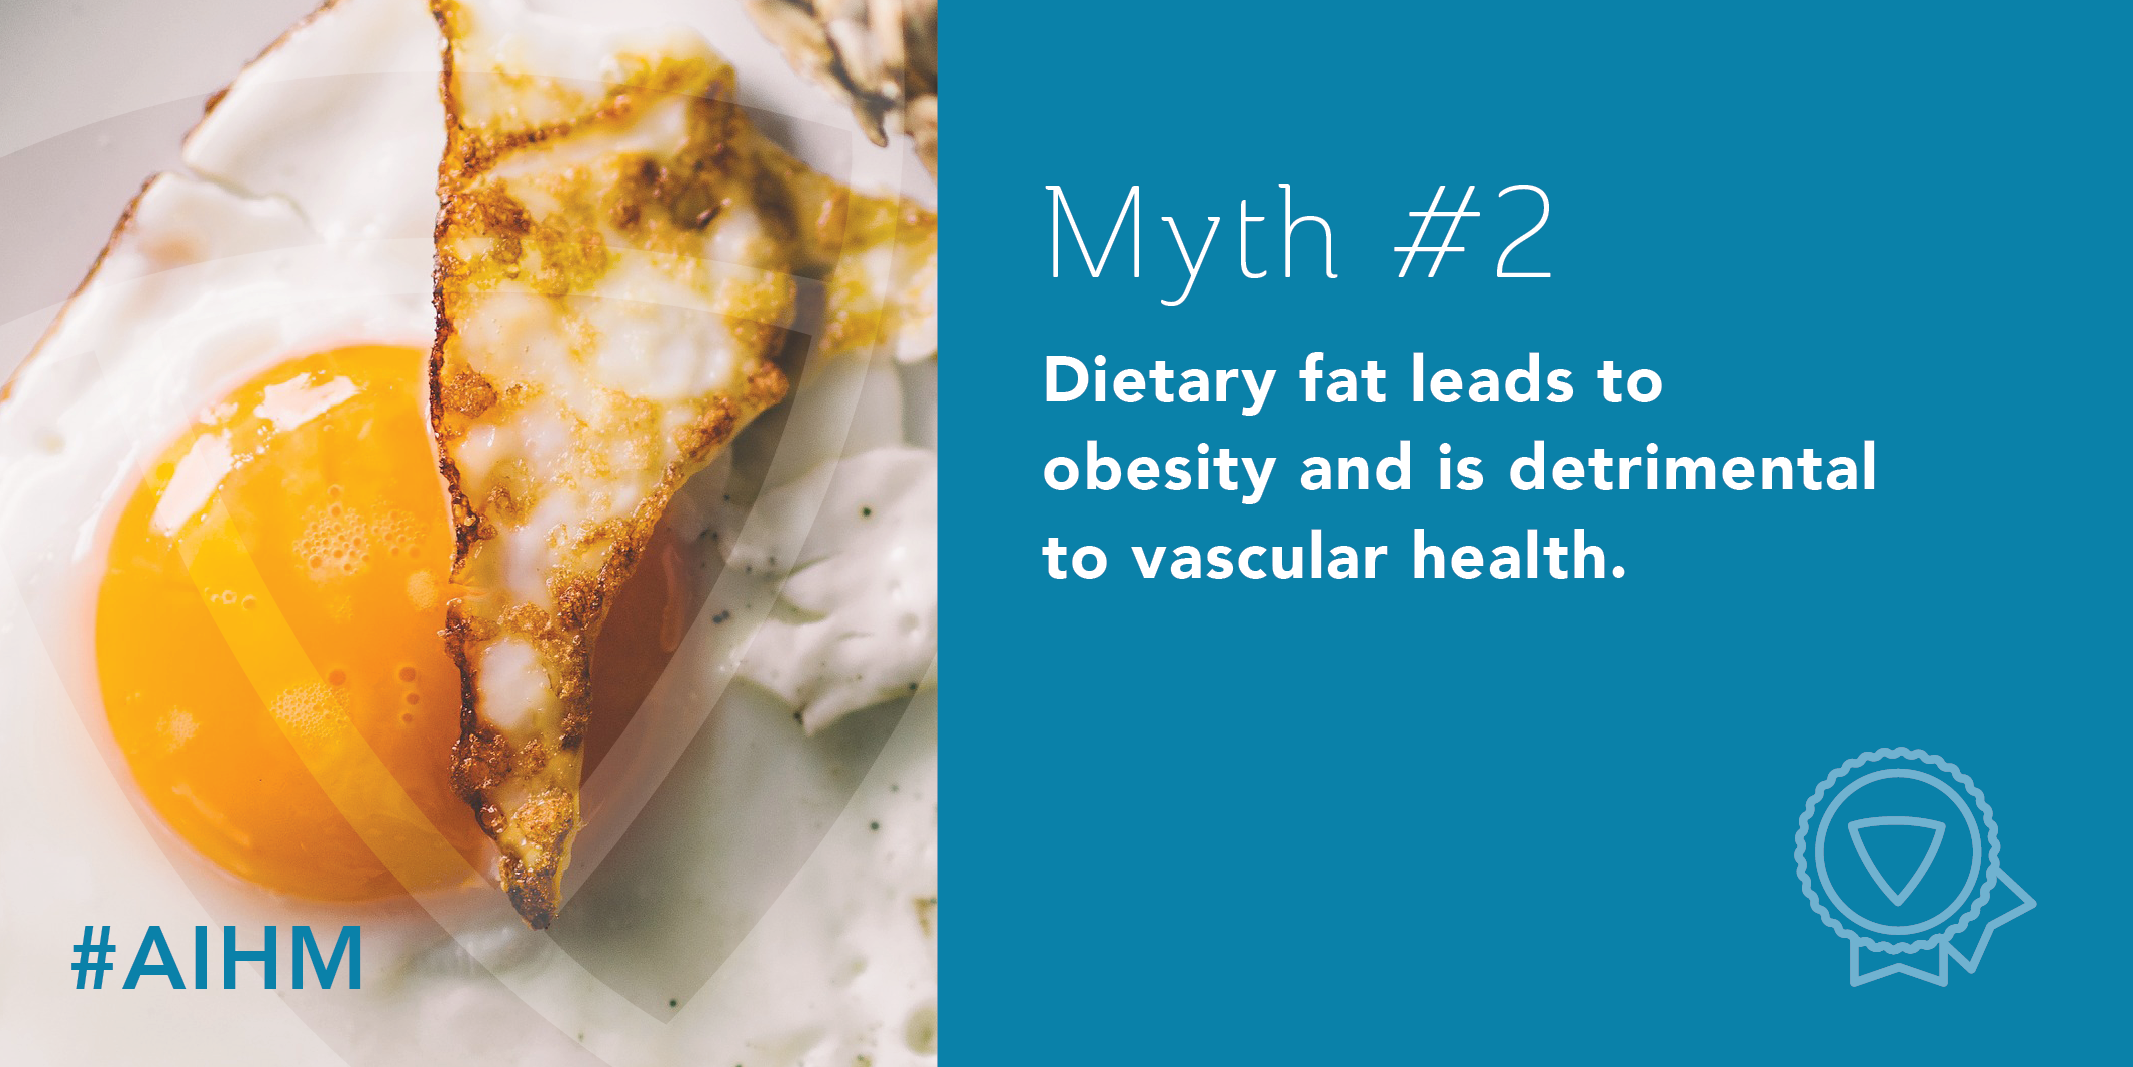 Myth #2: Dietary fat leads to obesity and is detrimental to vascular health.